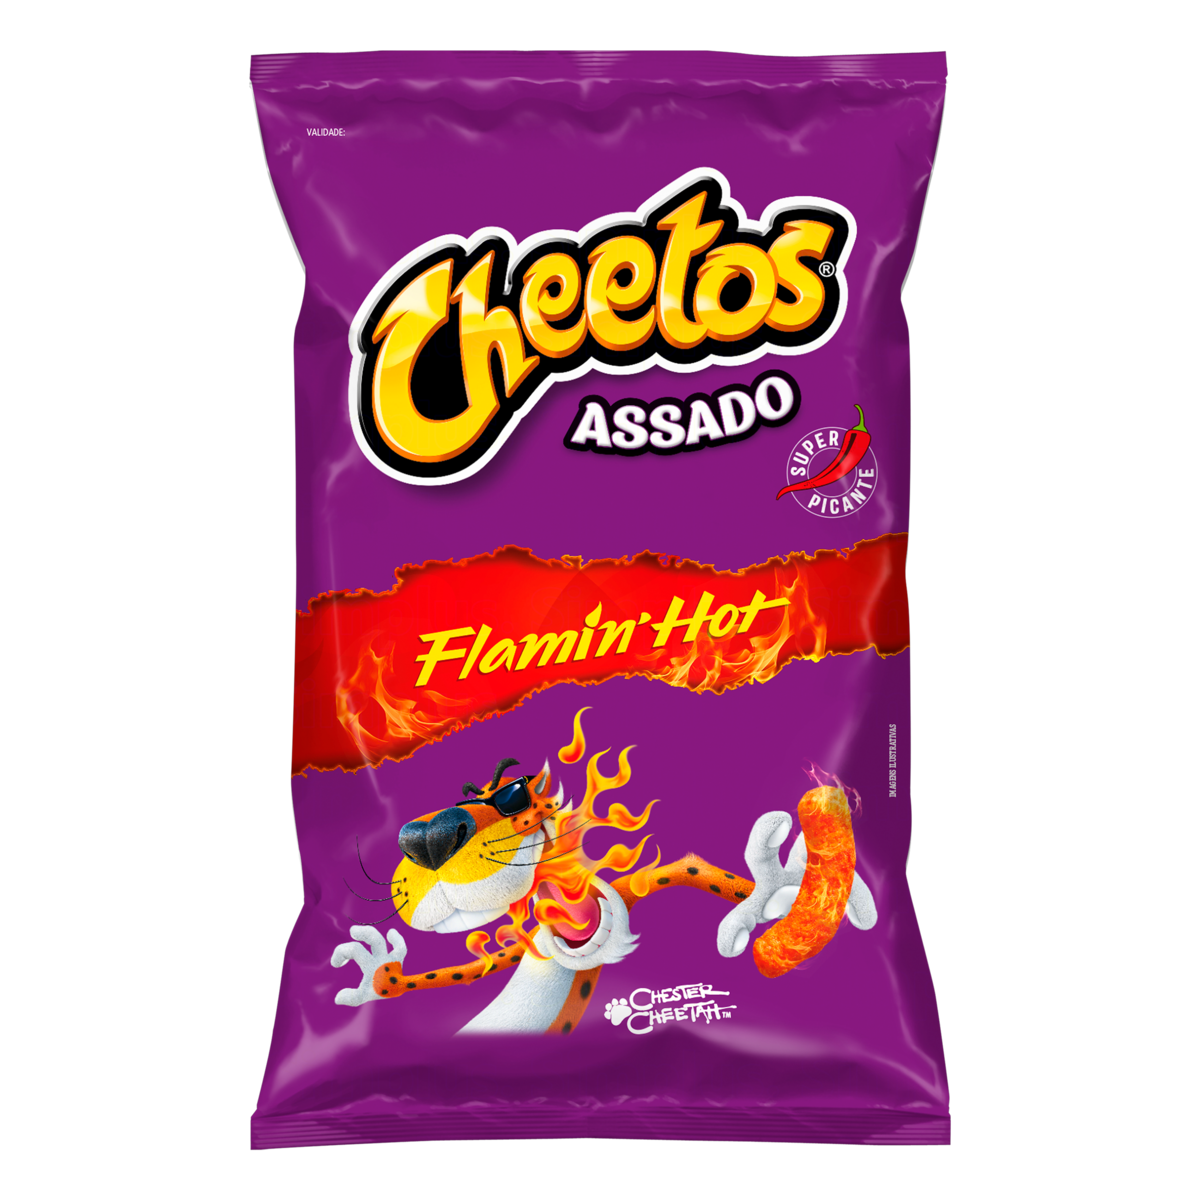 8.5OZ CHEETOS FLAMIN HOT CRUNCHY, PACK OF 4 - GTIN/EAN/UPC 28400589895 -  Product Details - Cosmos